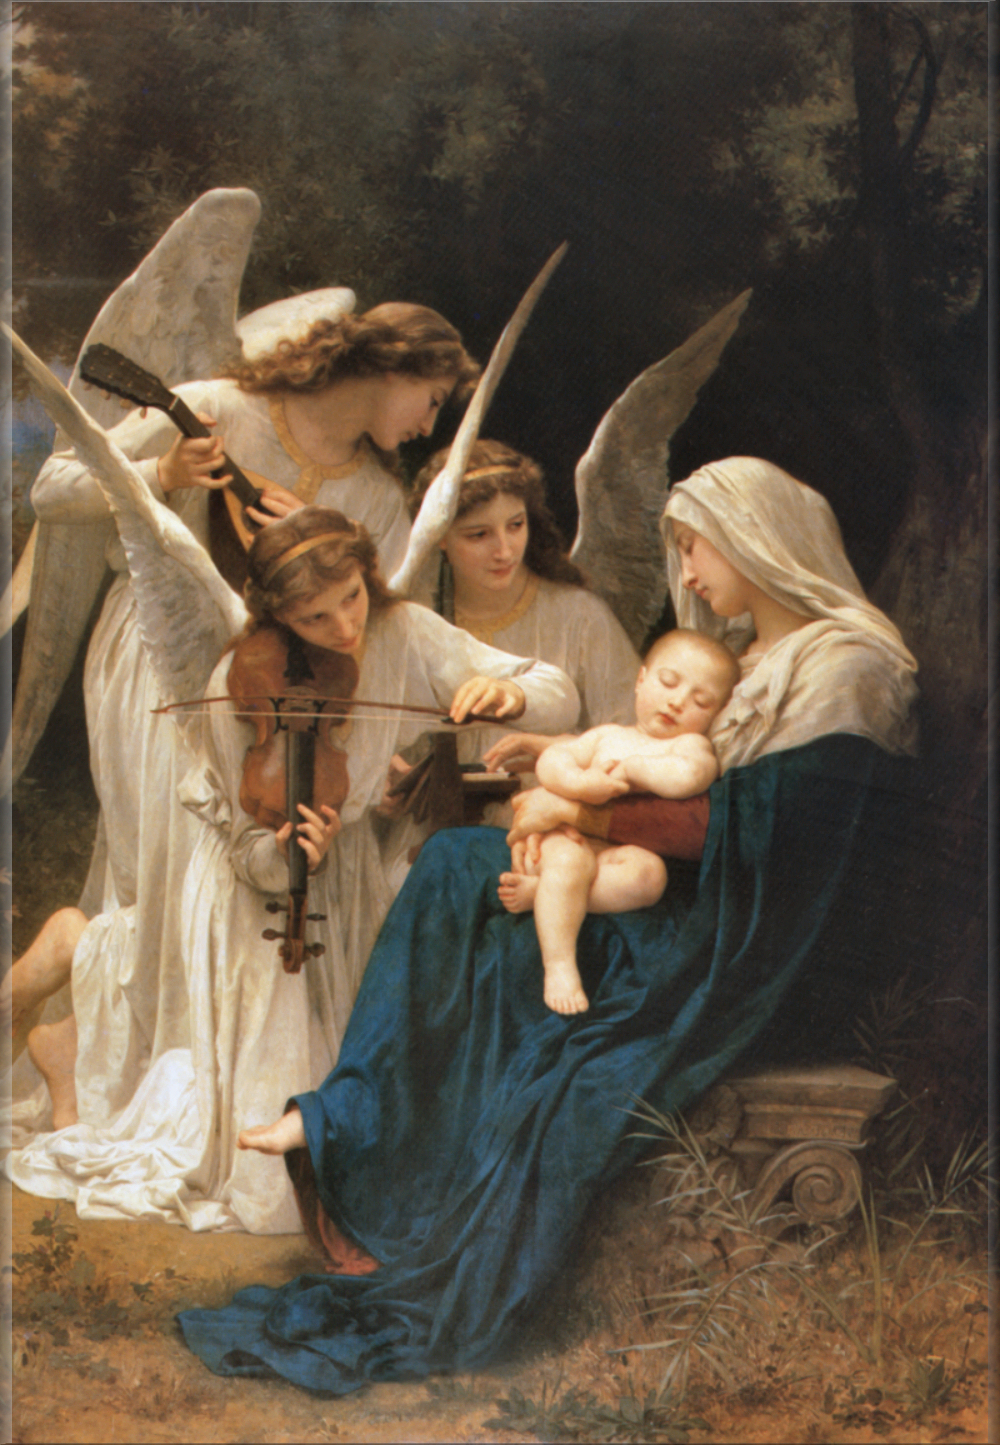 SONG OF THE ANGELS